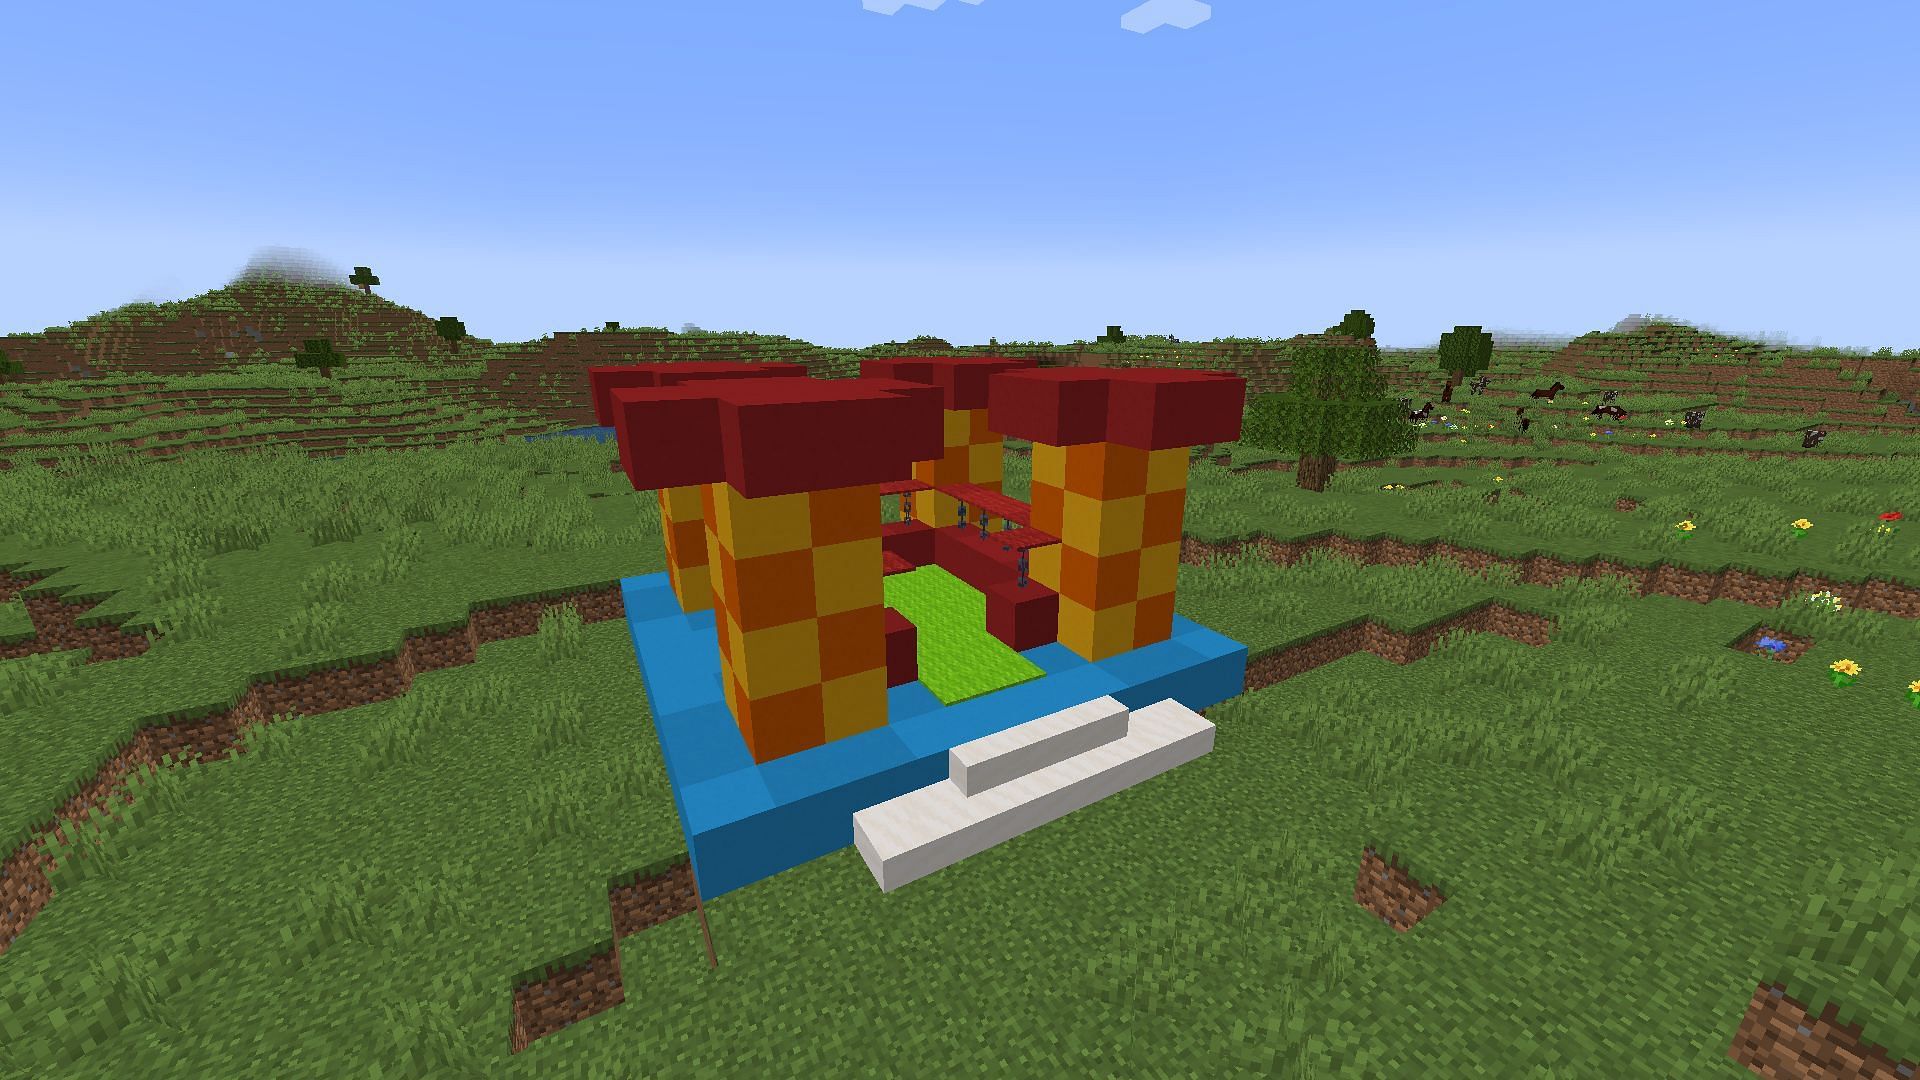 The completed bouncy house, with lime carpet covering the slime blocks (Image via Minecraft)